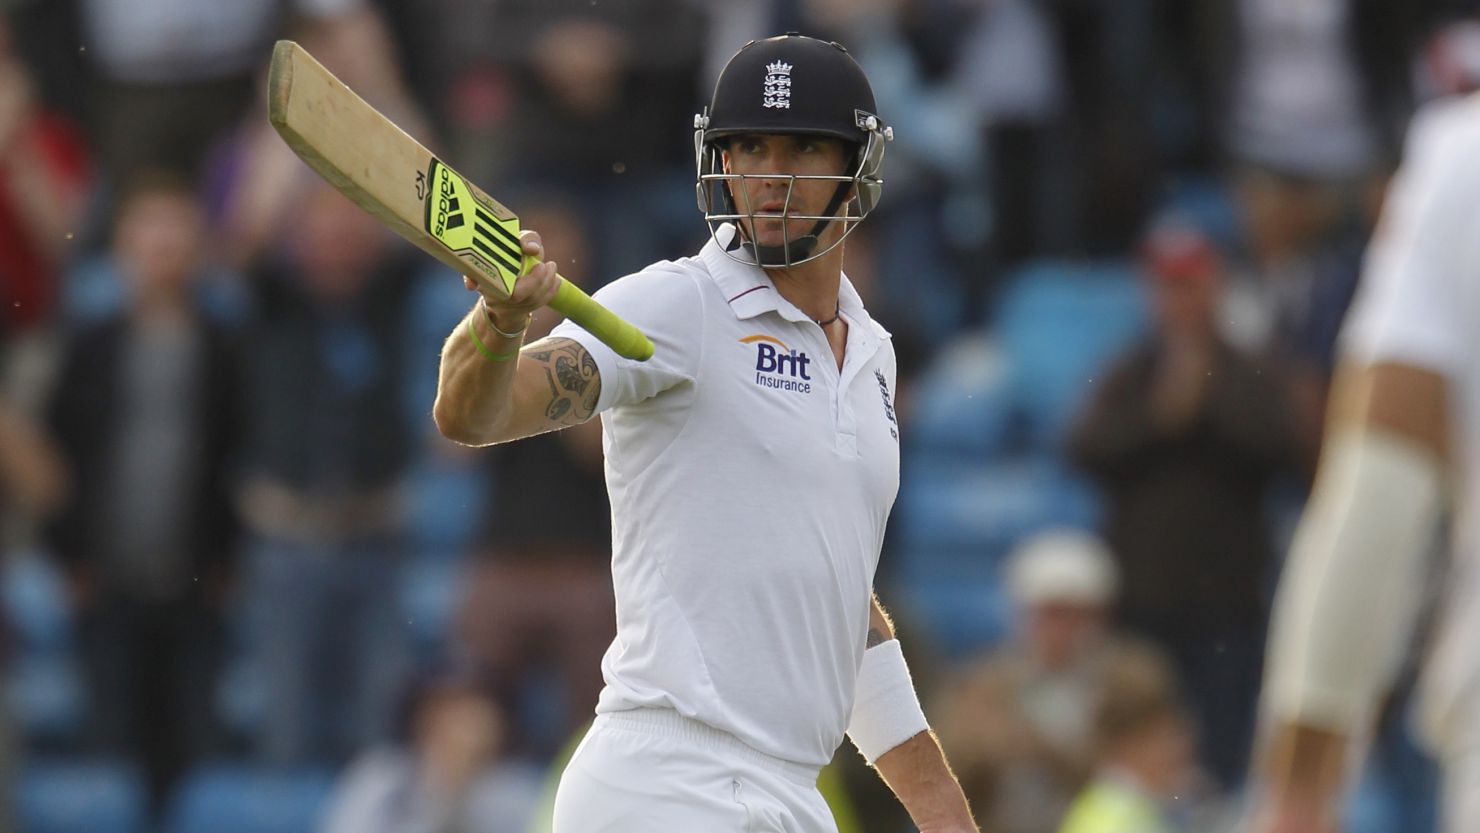 England batsman Kevin Pietersen has been dropped for the final Test against South Africa at Lord's.